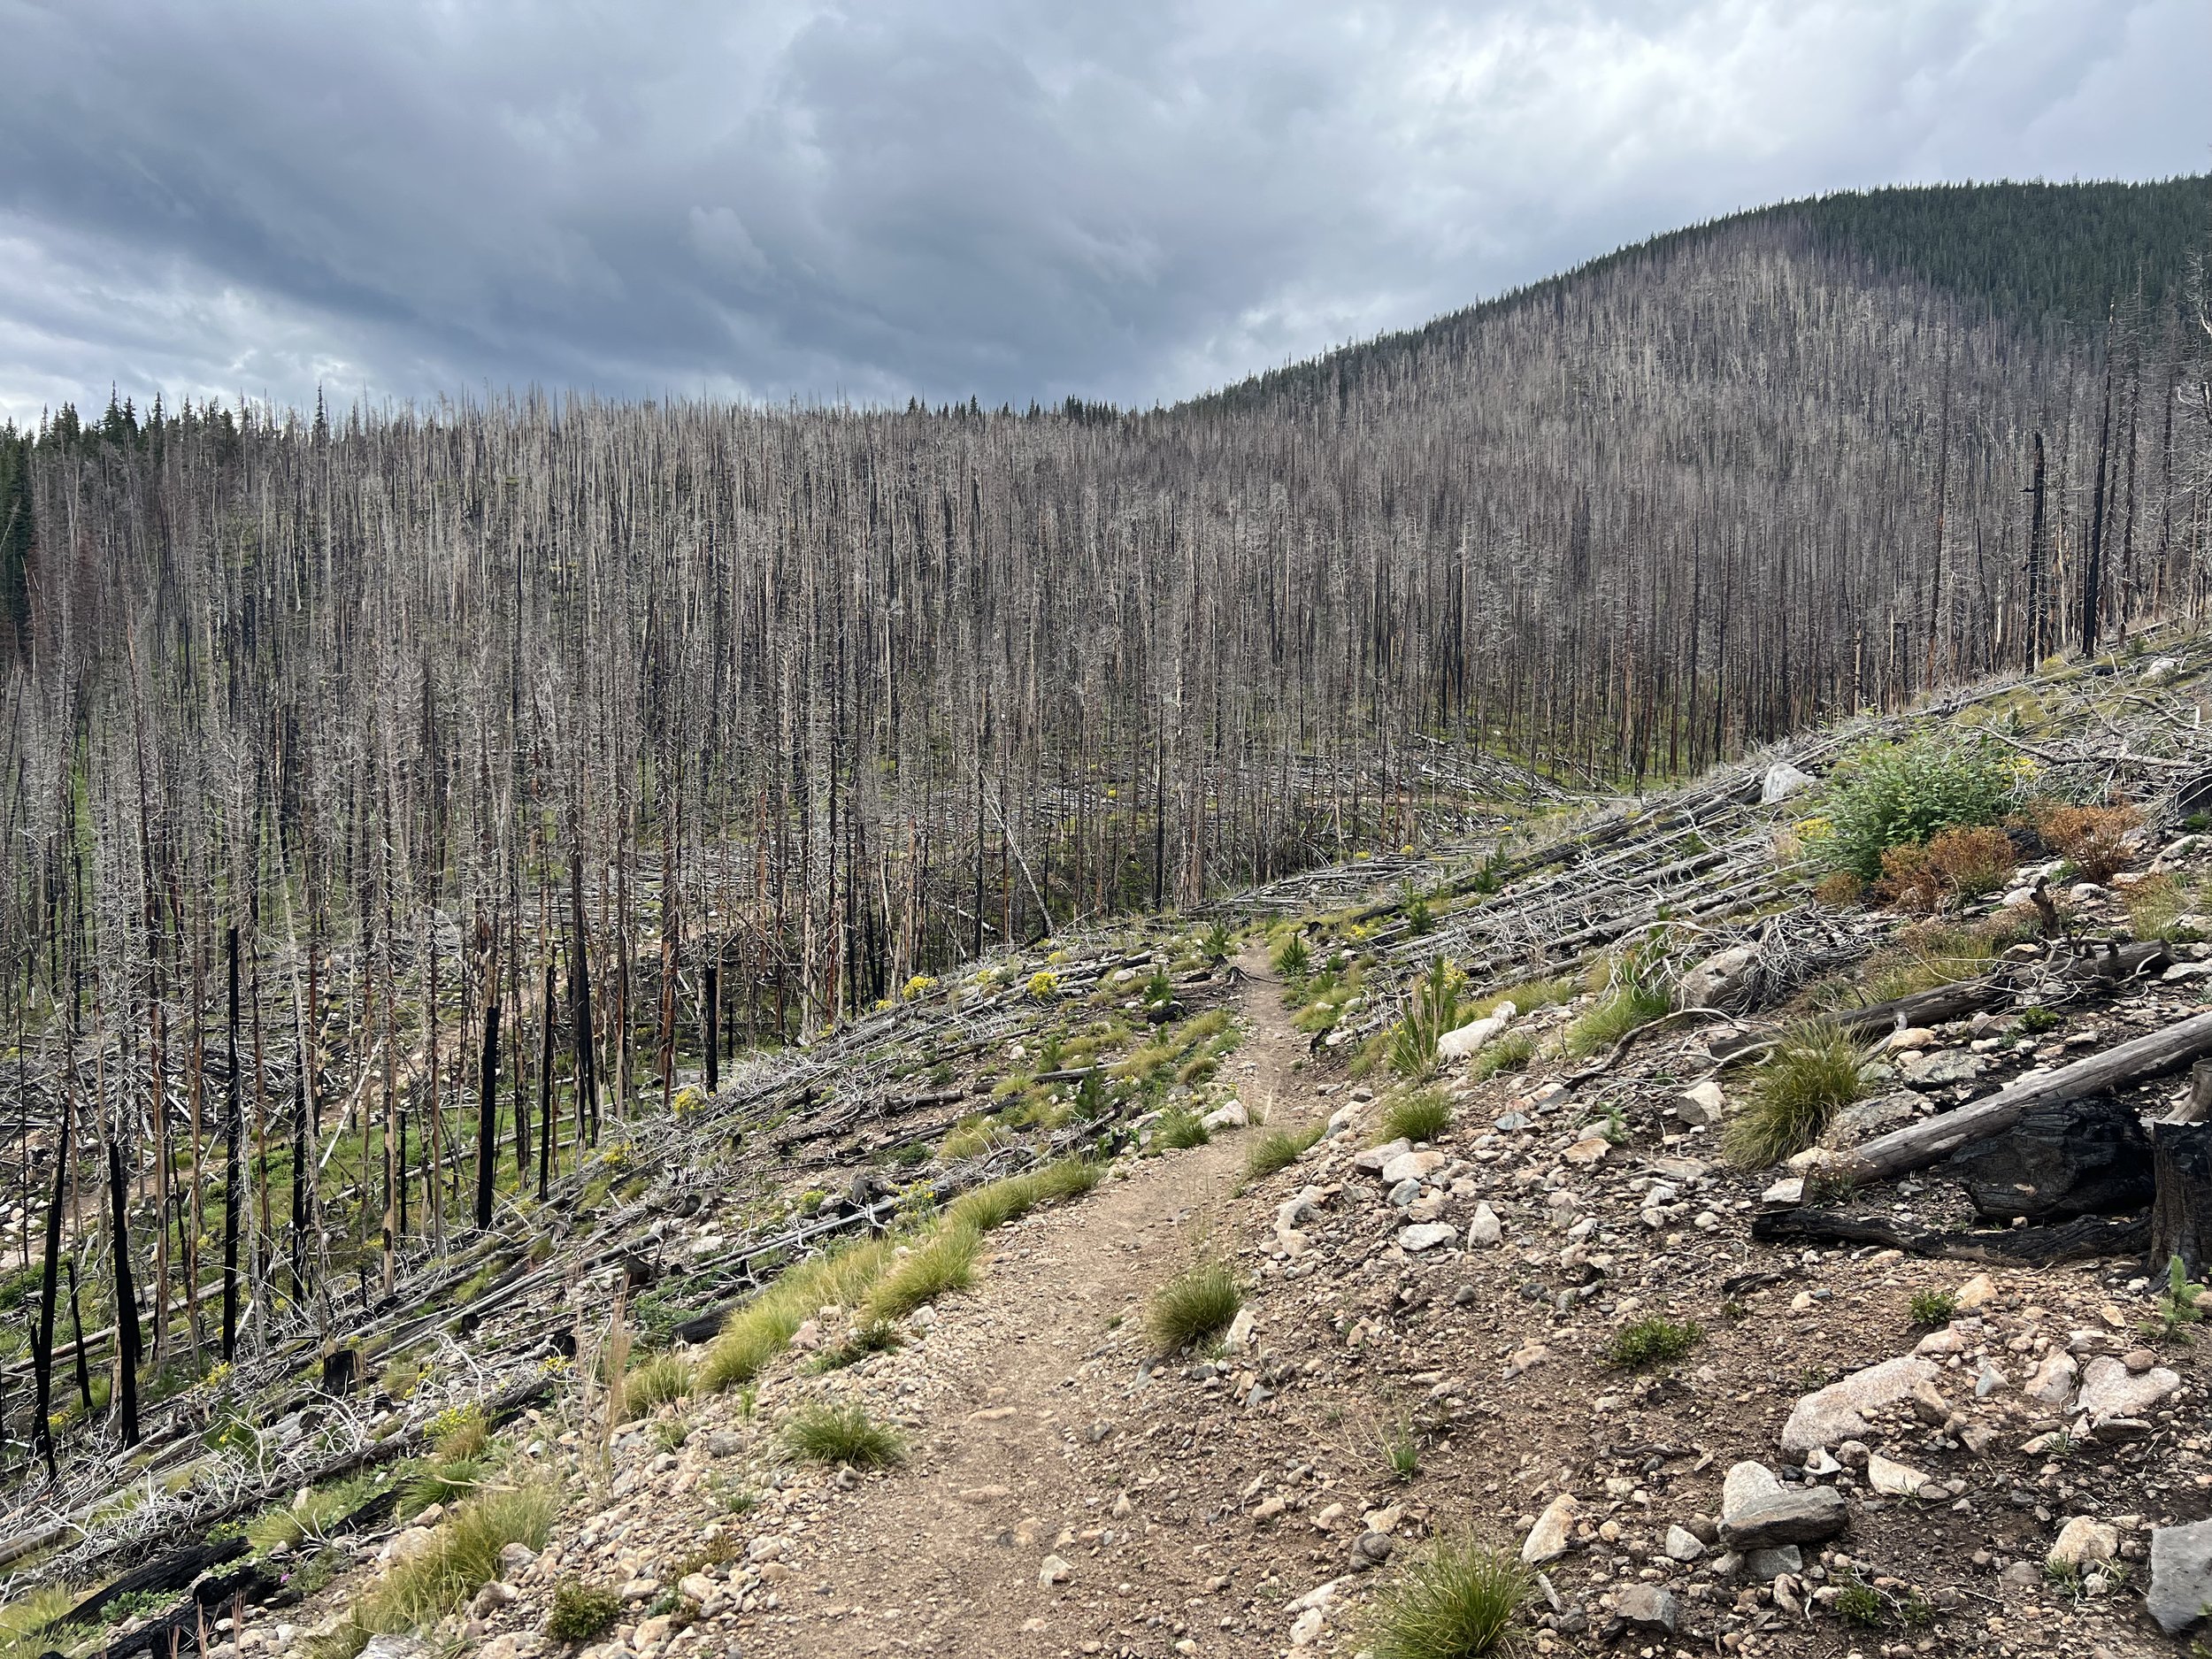   The Miner’s Creek burn area on the climb to Tenmile Crest.  